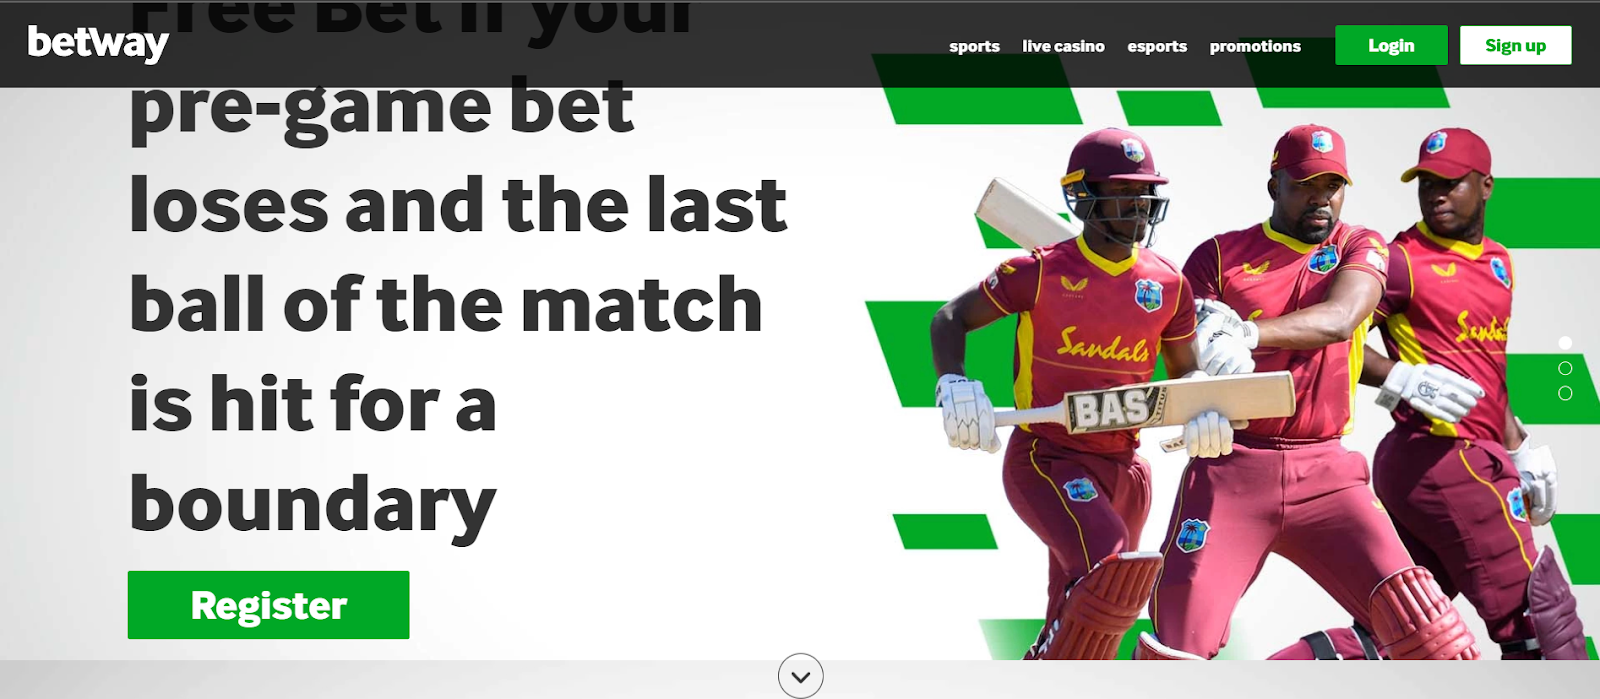 betway’s homepage to sign up, login and get started with betting in sports as well as esports.